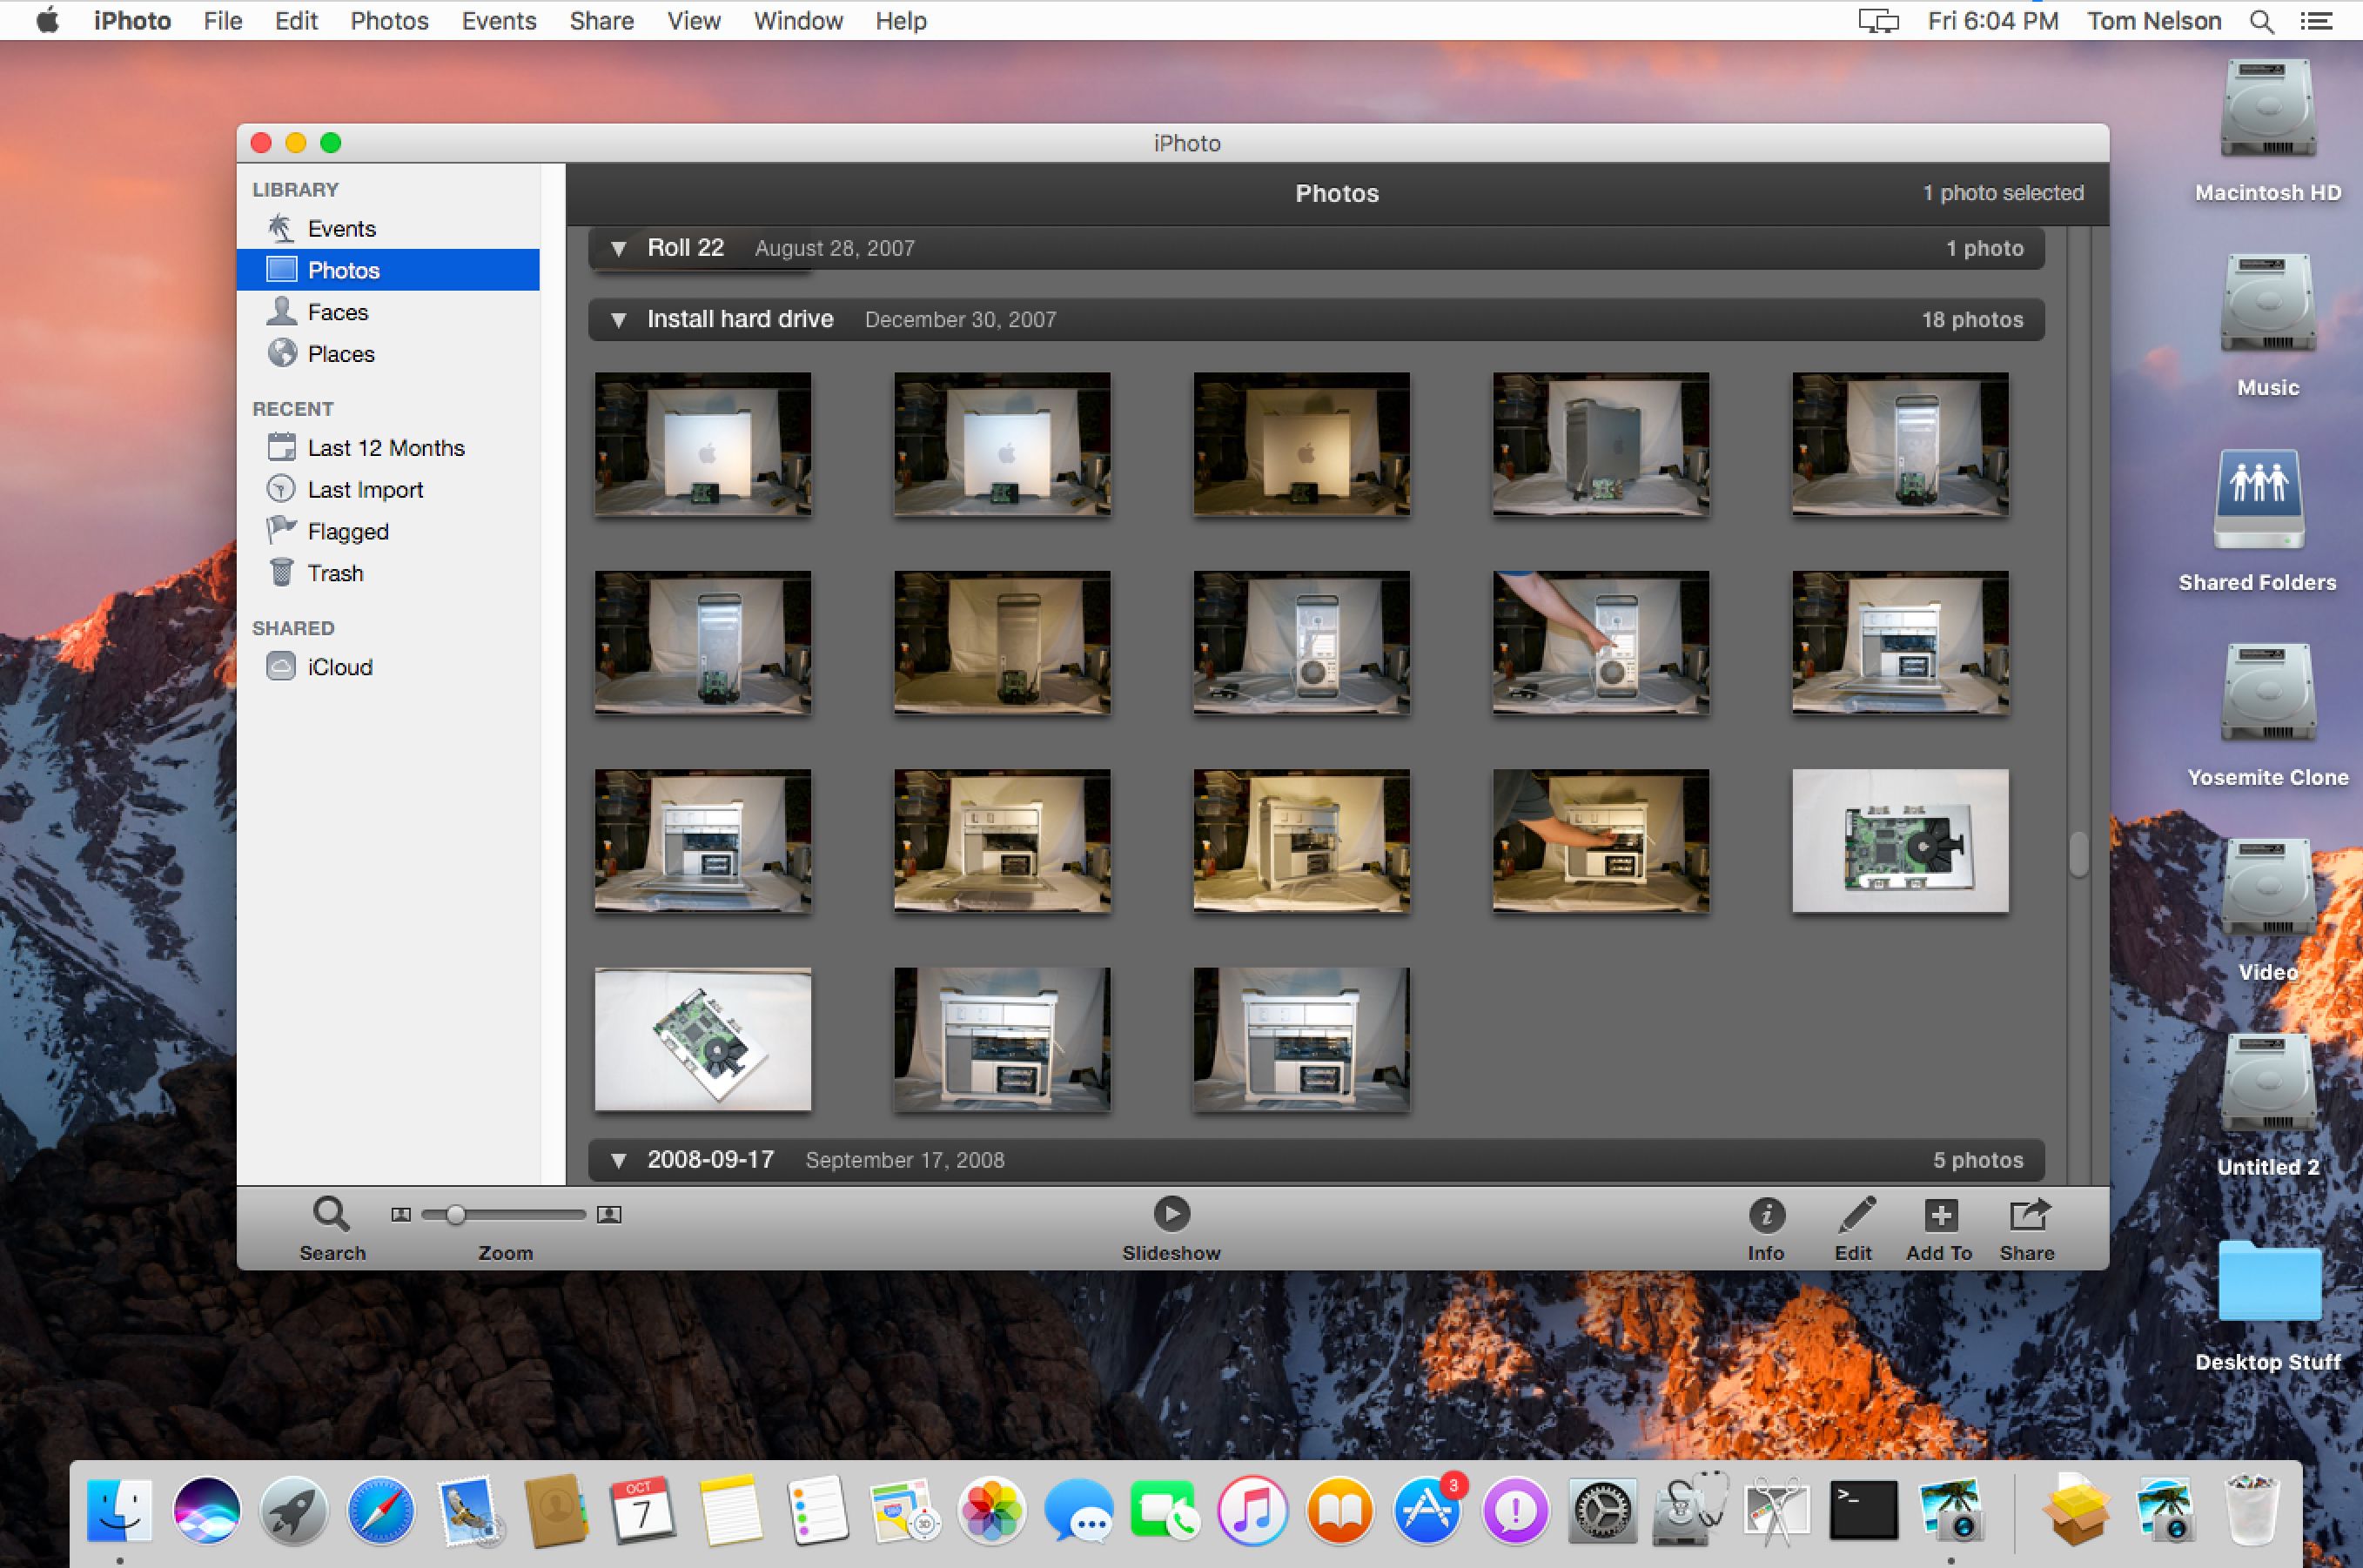 download iphoto for mac free 10.6.8